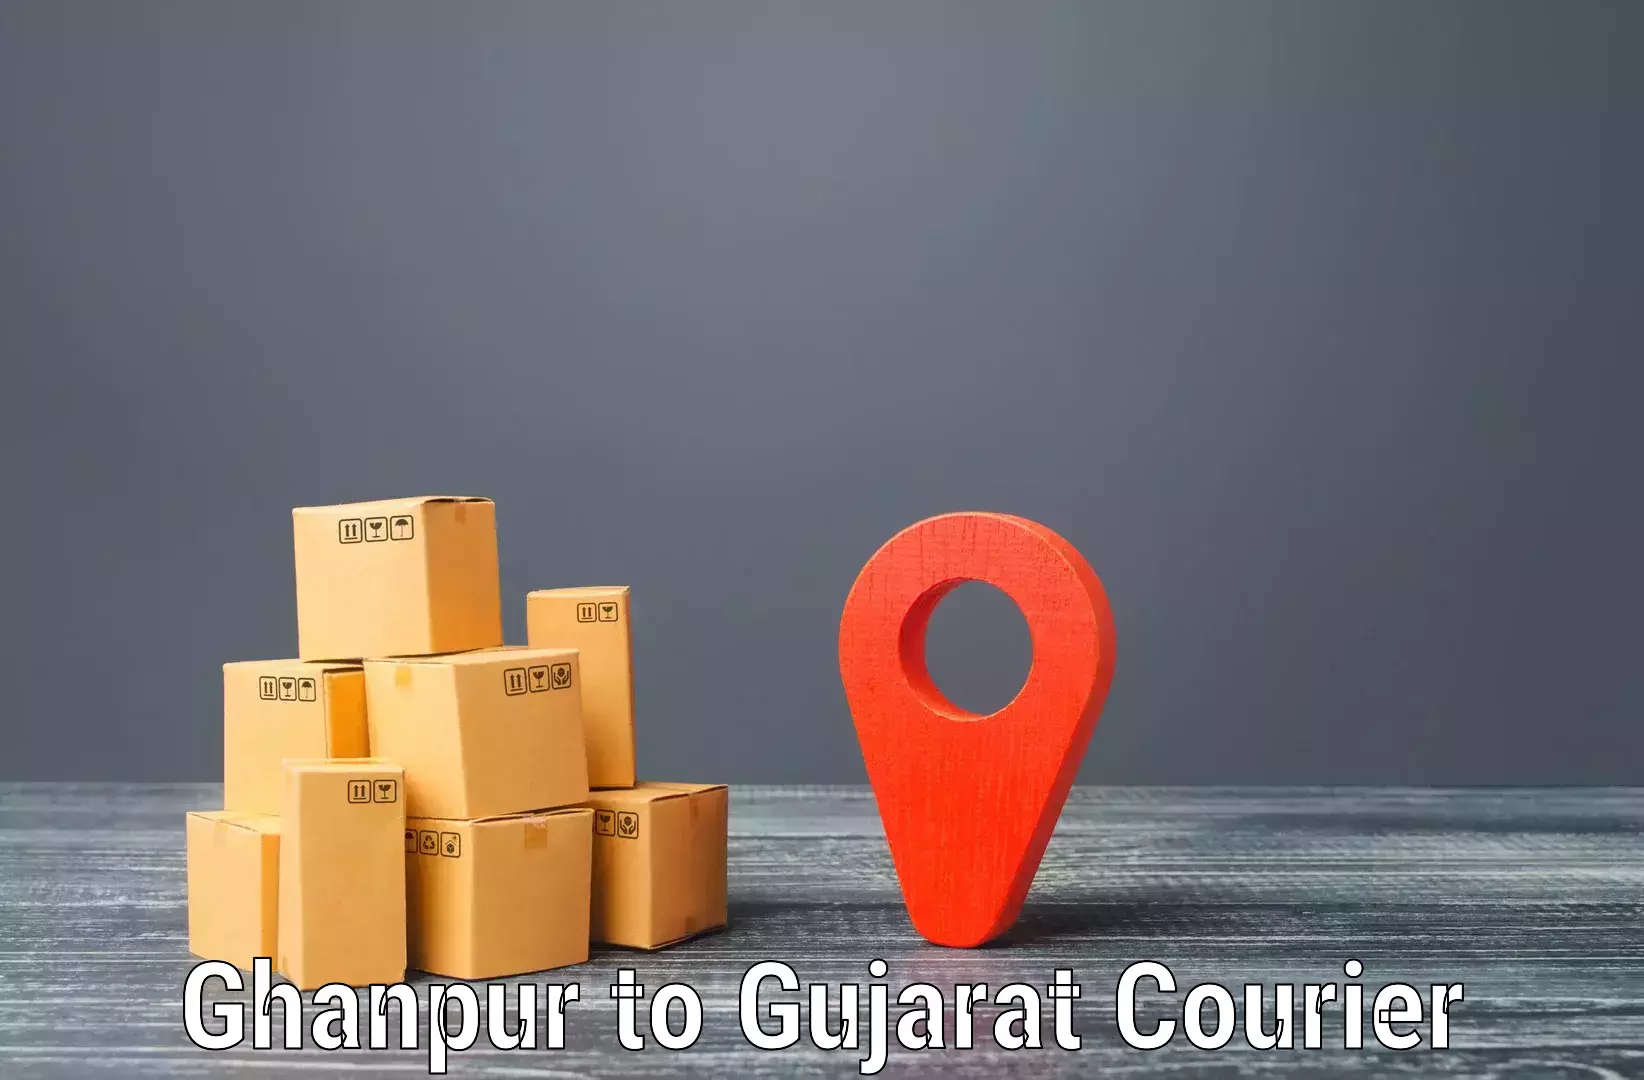 High-priority parcel service Ghanpur to Dhasa